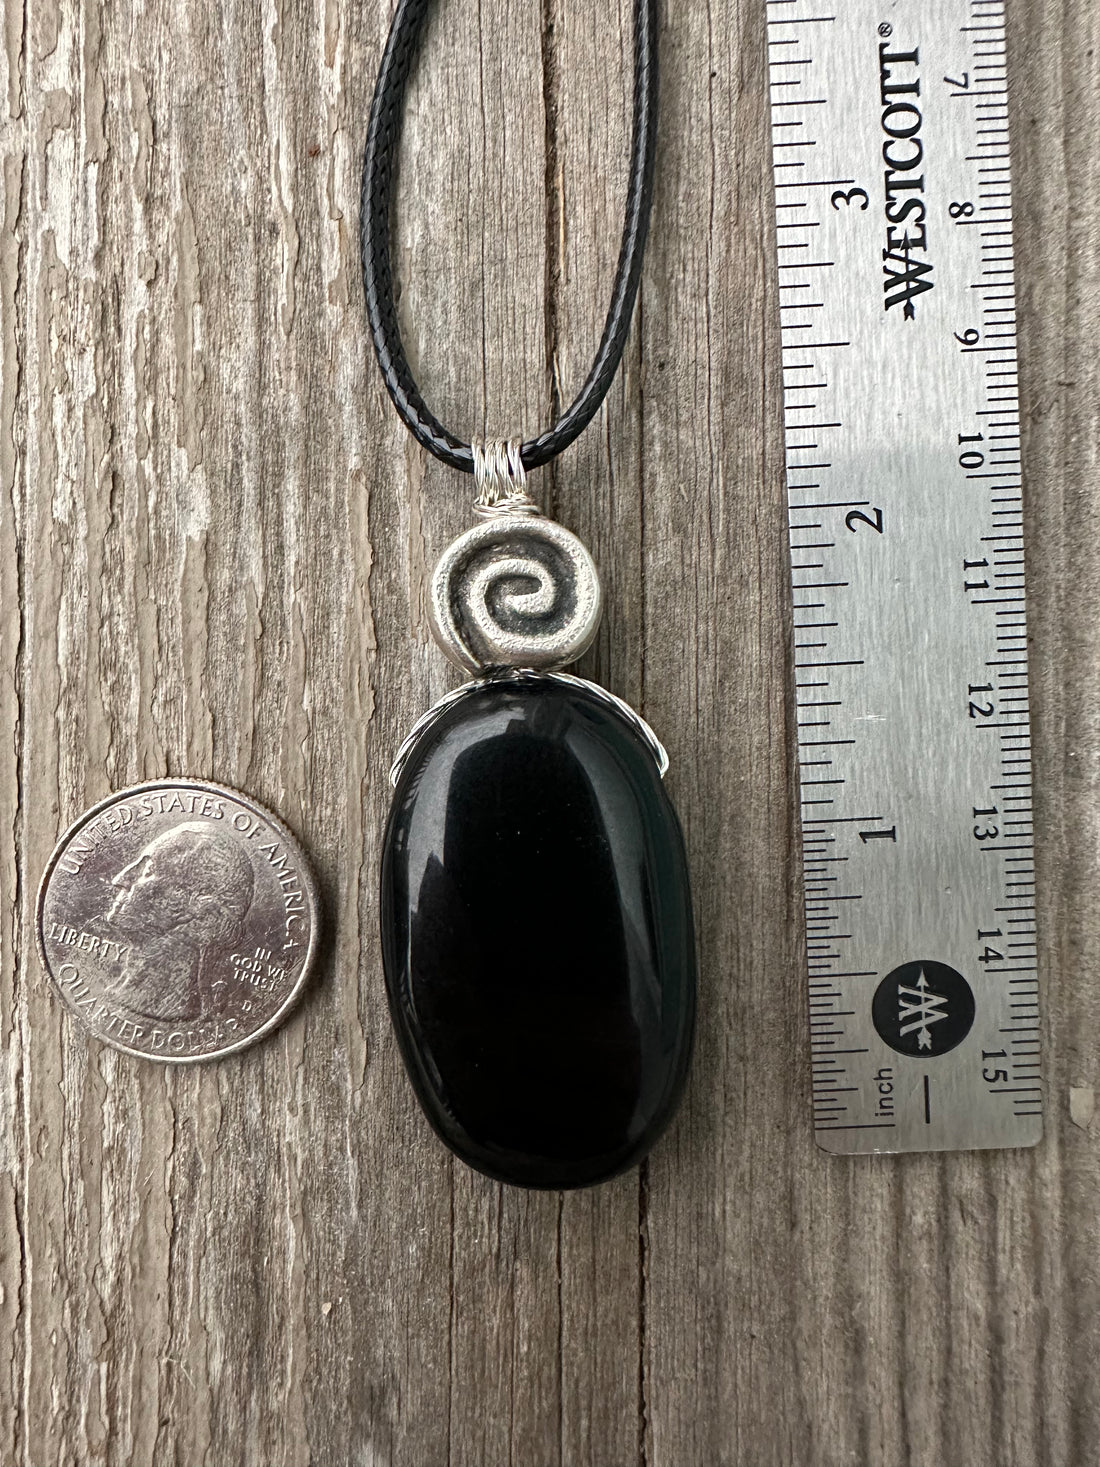 Basalt Thought to Inspire Courage, Strength and Creativity.